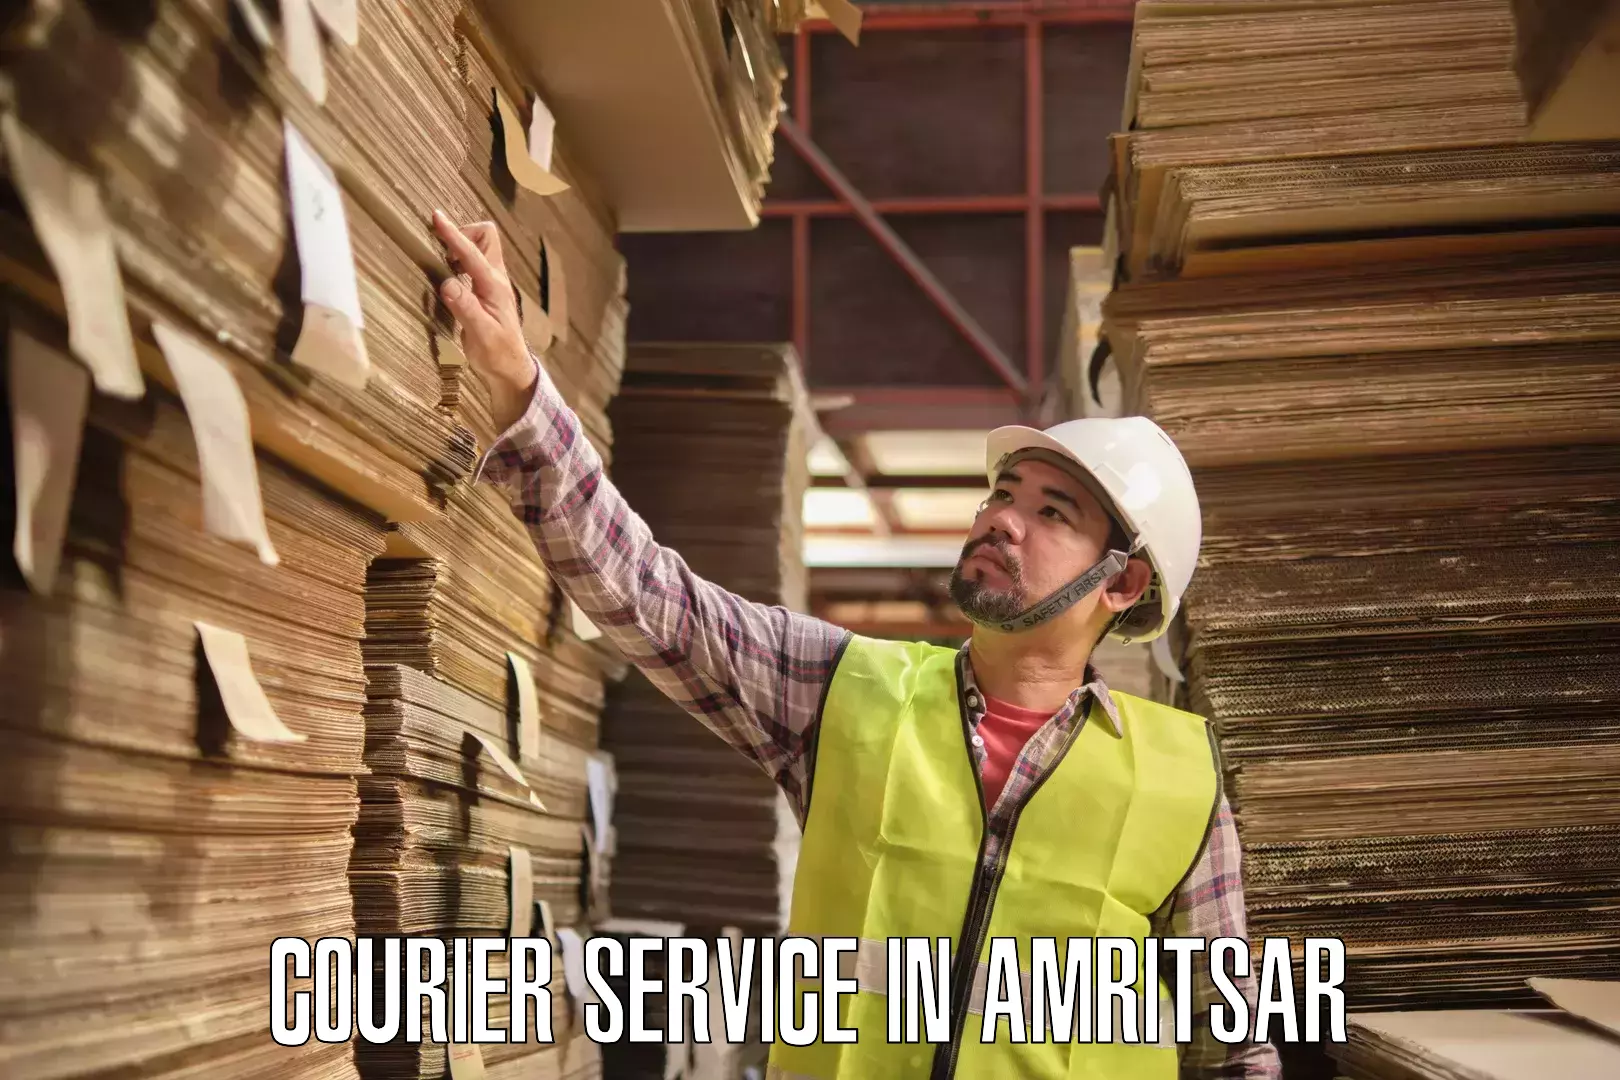 Express postal services in Amritsar